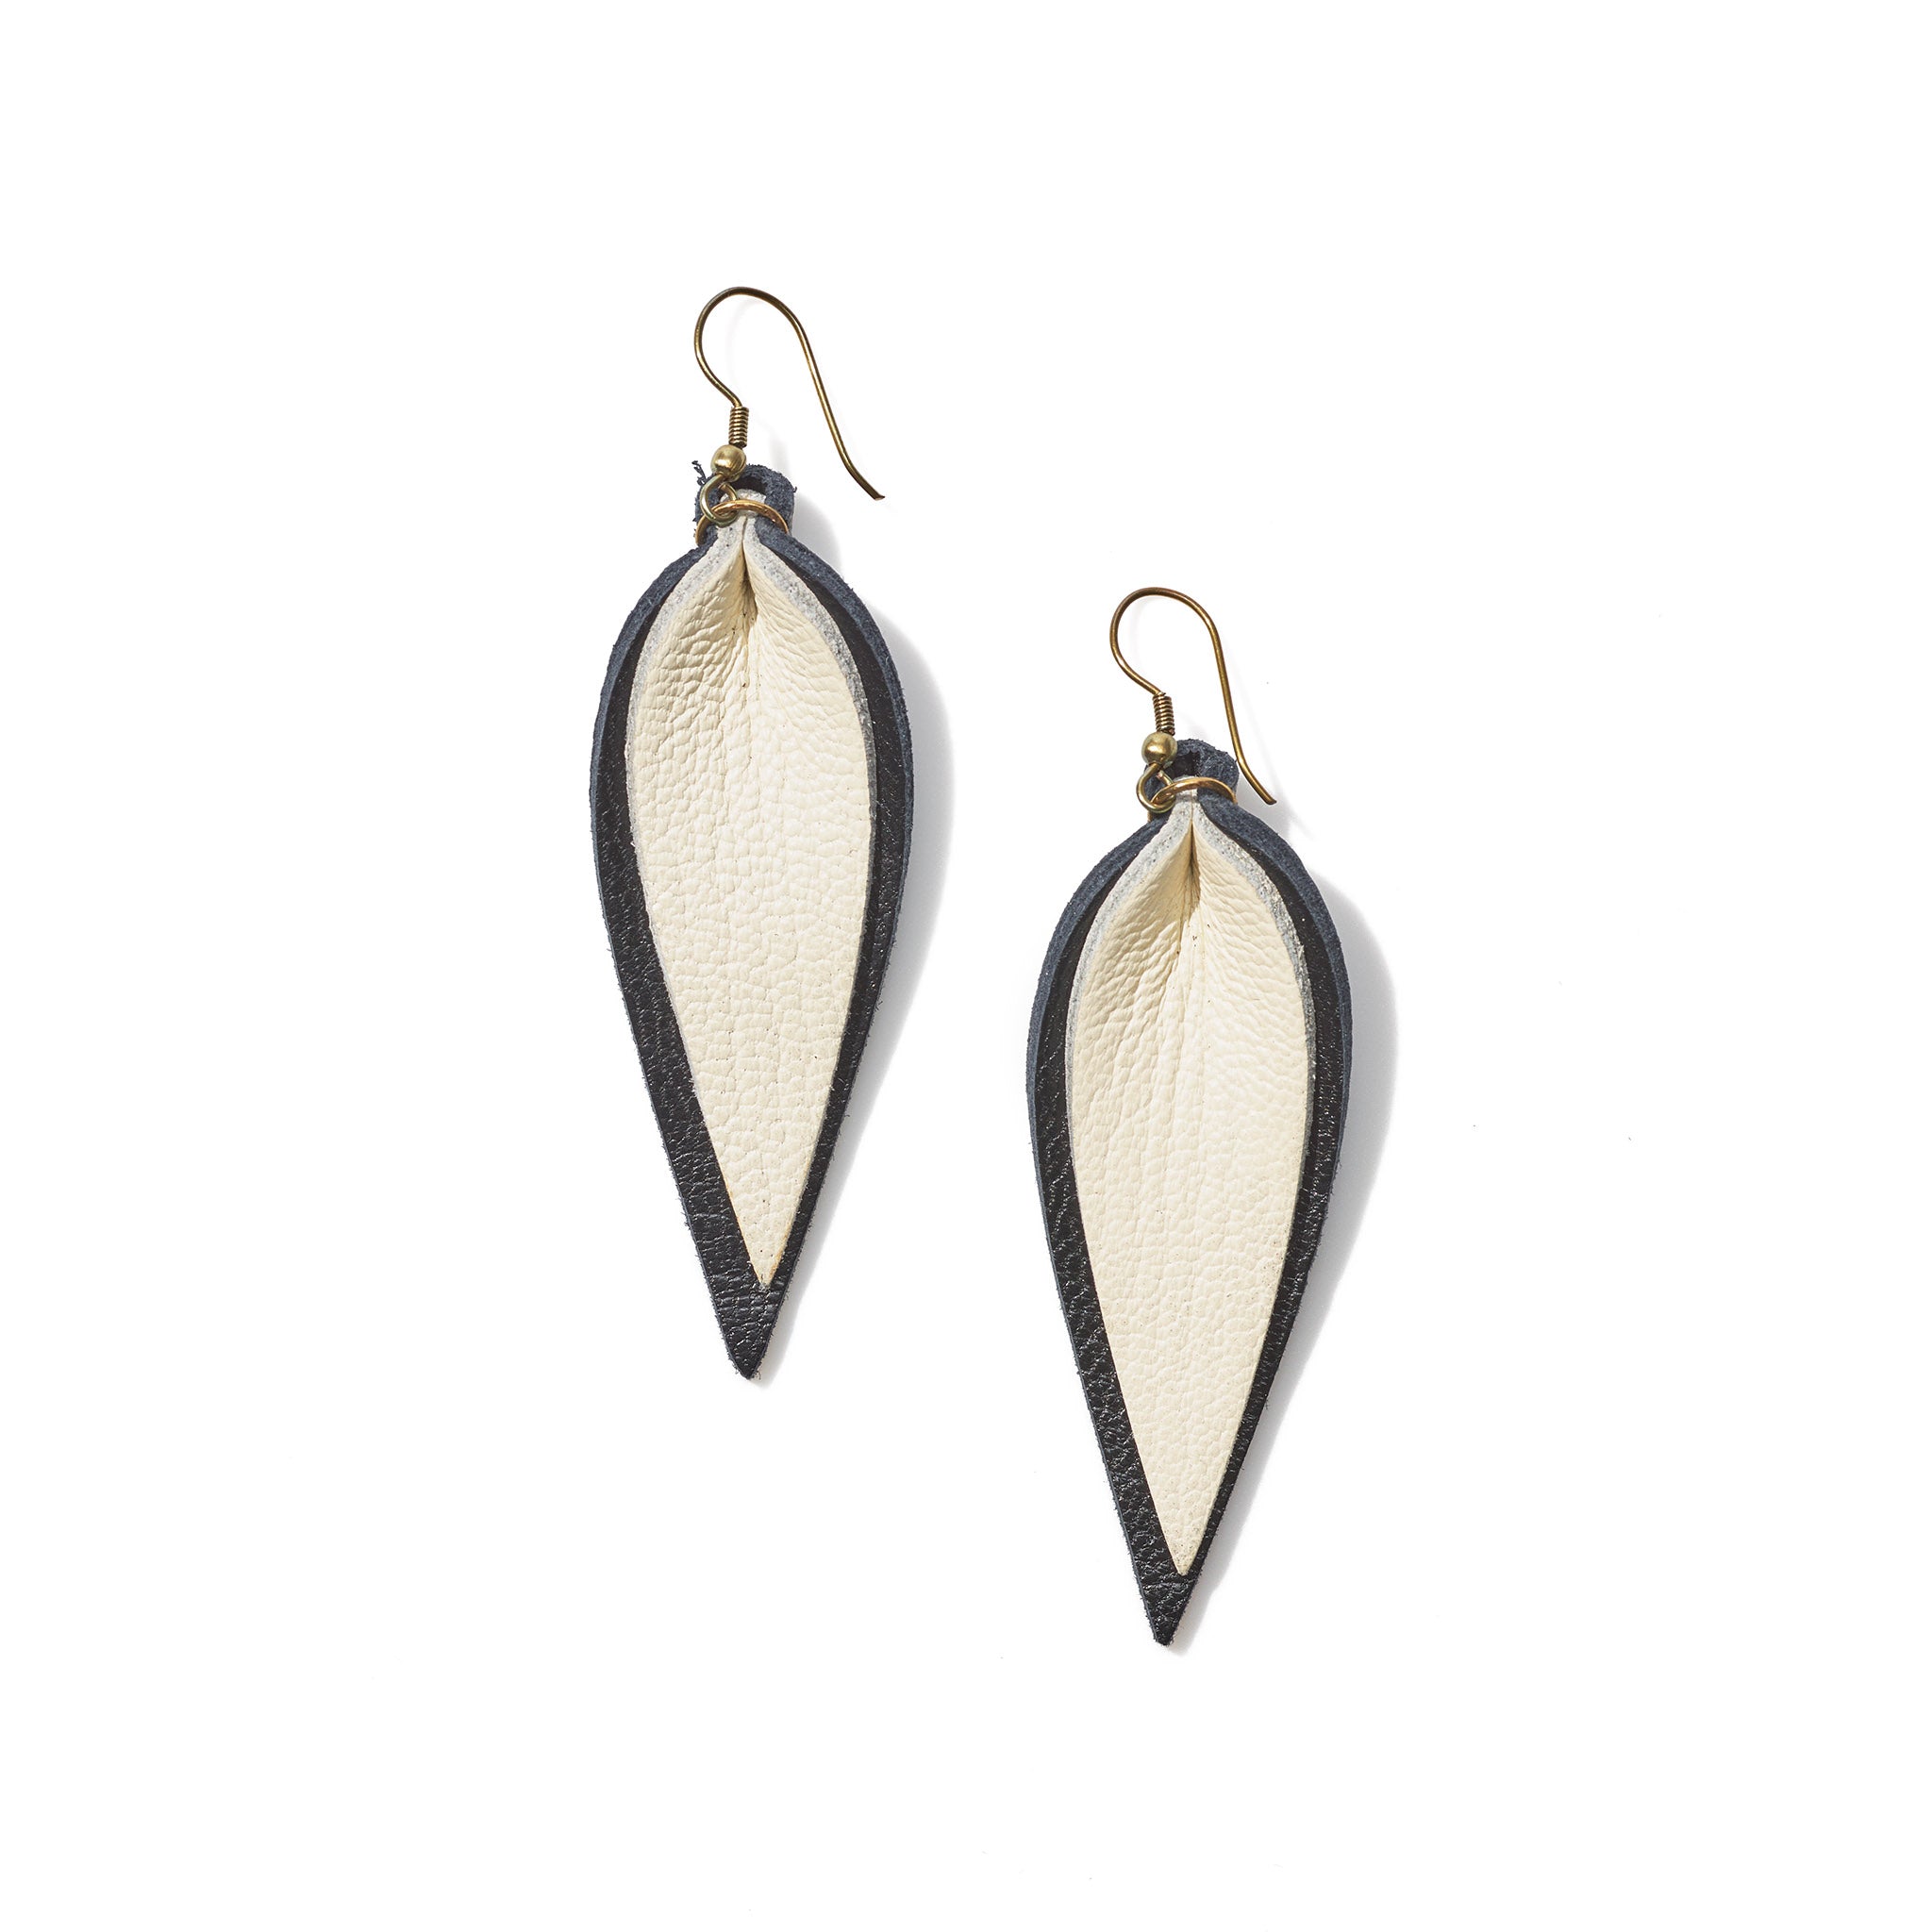 Classic design that transitions effortlessly from day to night, these black and white leather leaf earrings are handcrafted from sustainable leather.